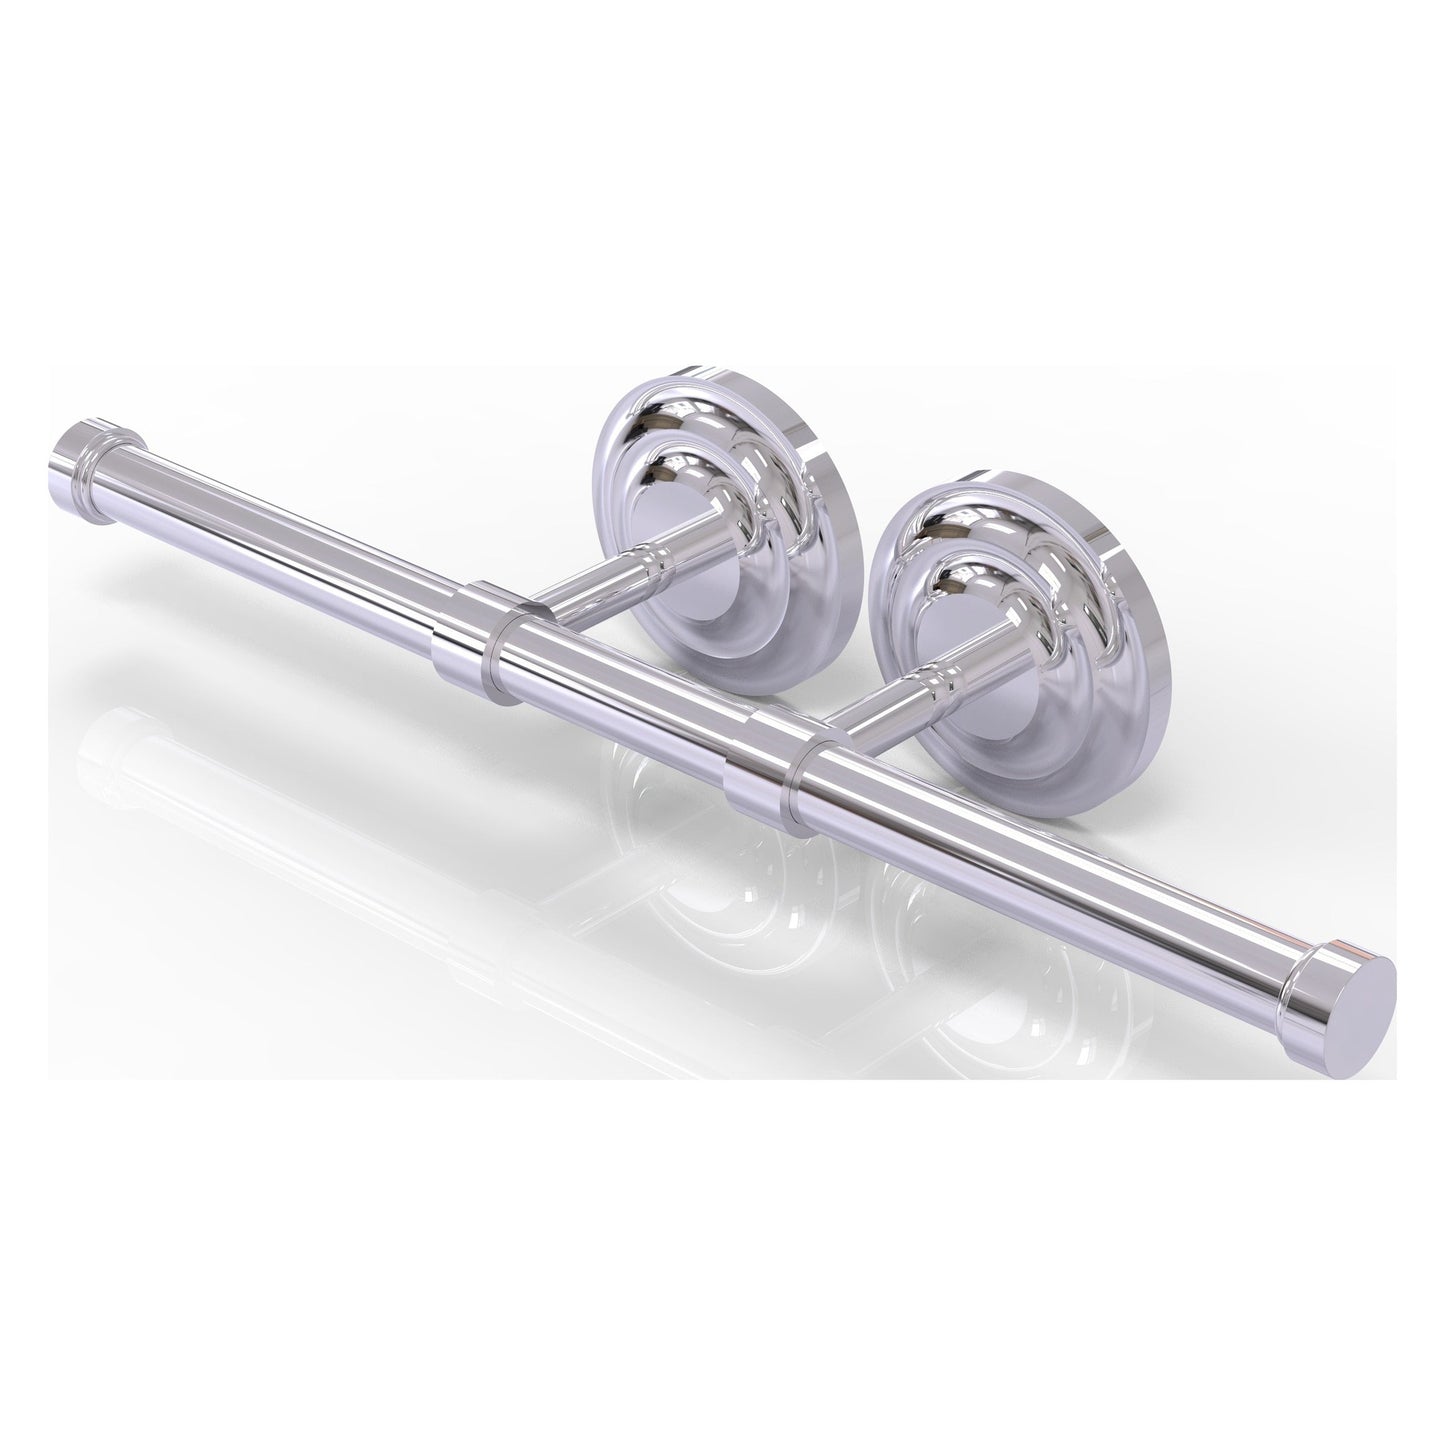 Allied Brass Que New 14.9" x 3.6" Polished Chrome Solid Brass Double Roll Toilet Tissue Holder